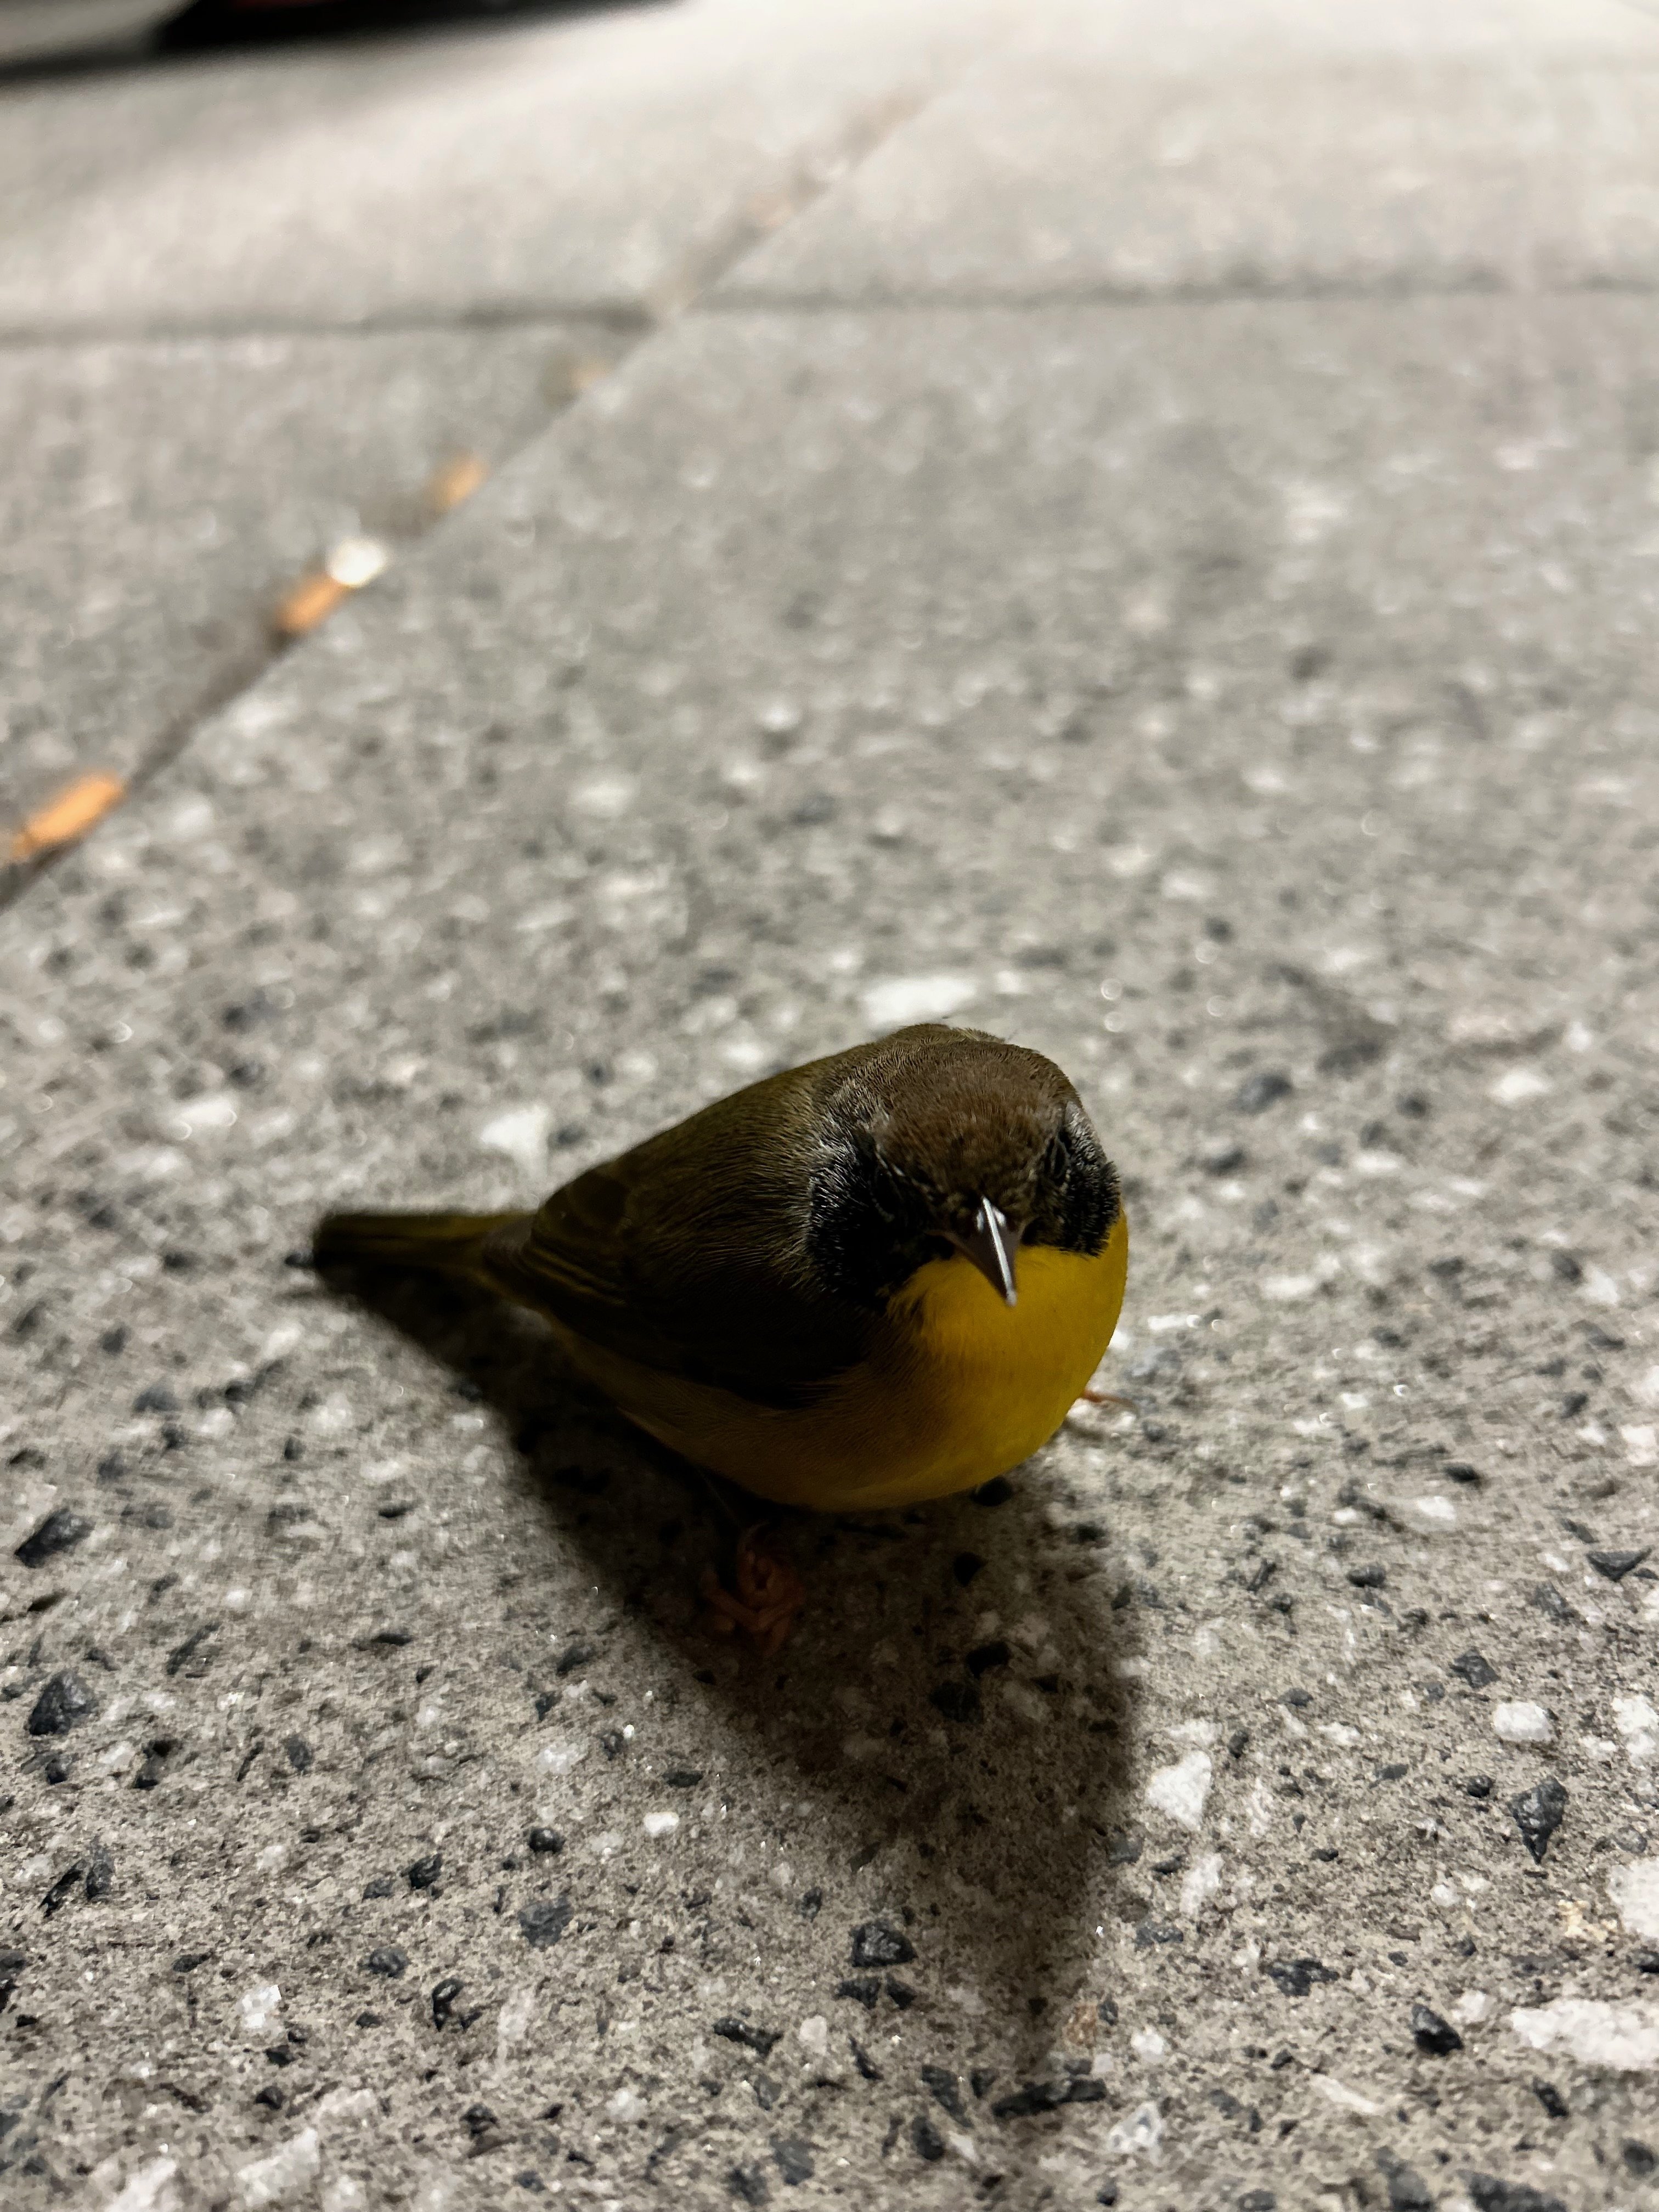 I found this bird outside while I was on my break at work. It let me get surprisingly close, which made me think it was injured at first, but then it flew off :(